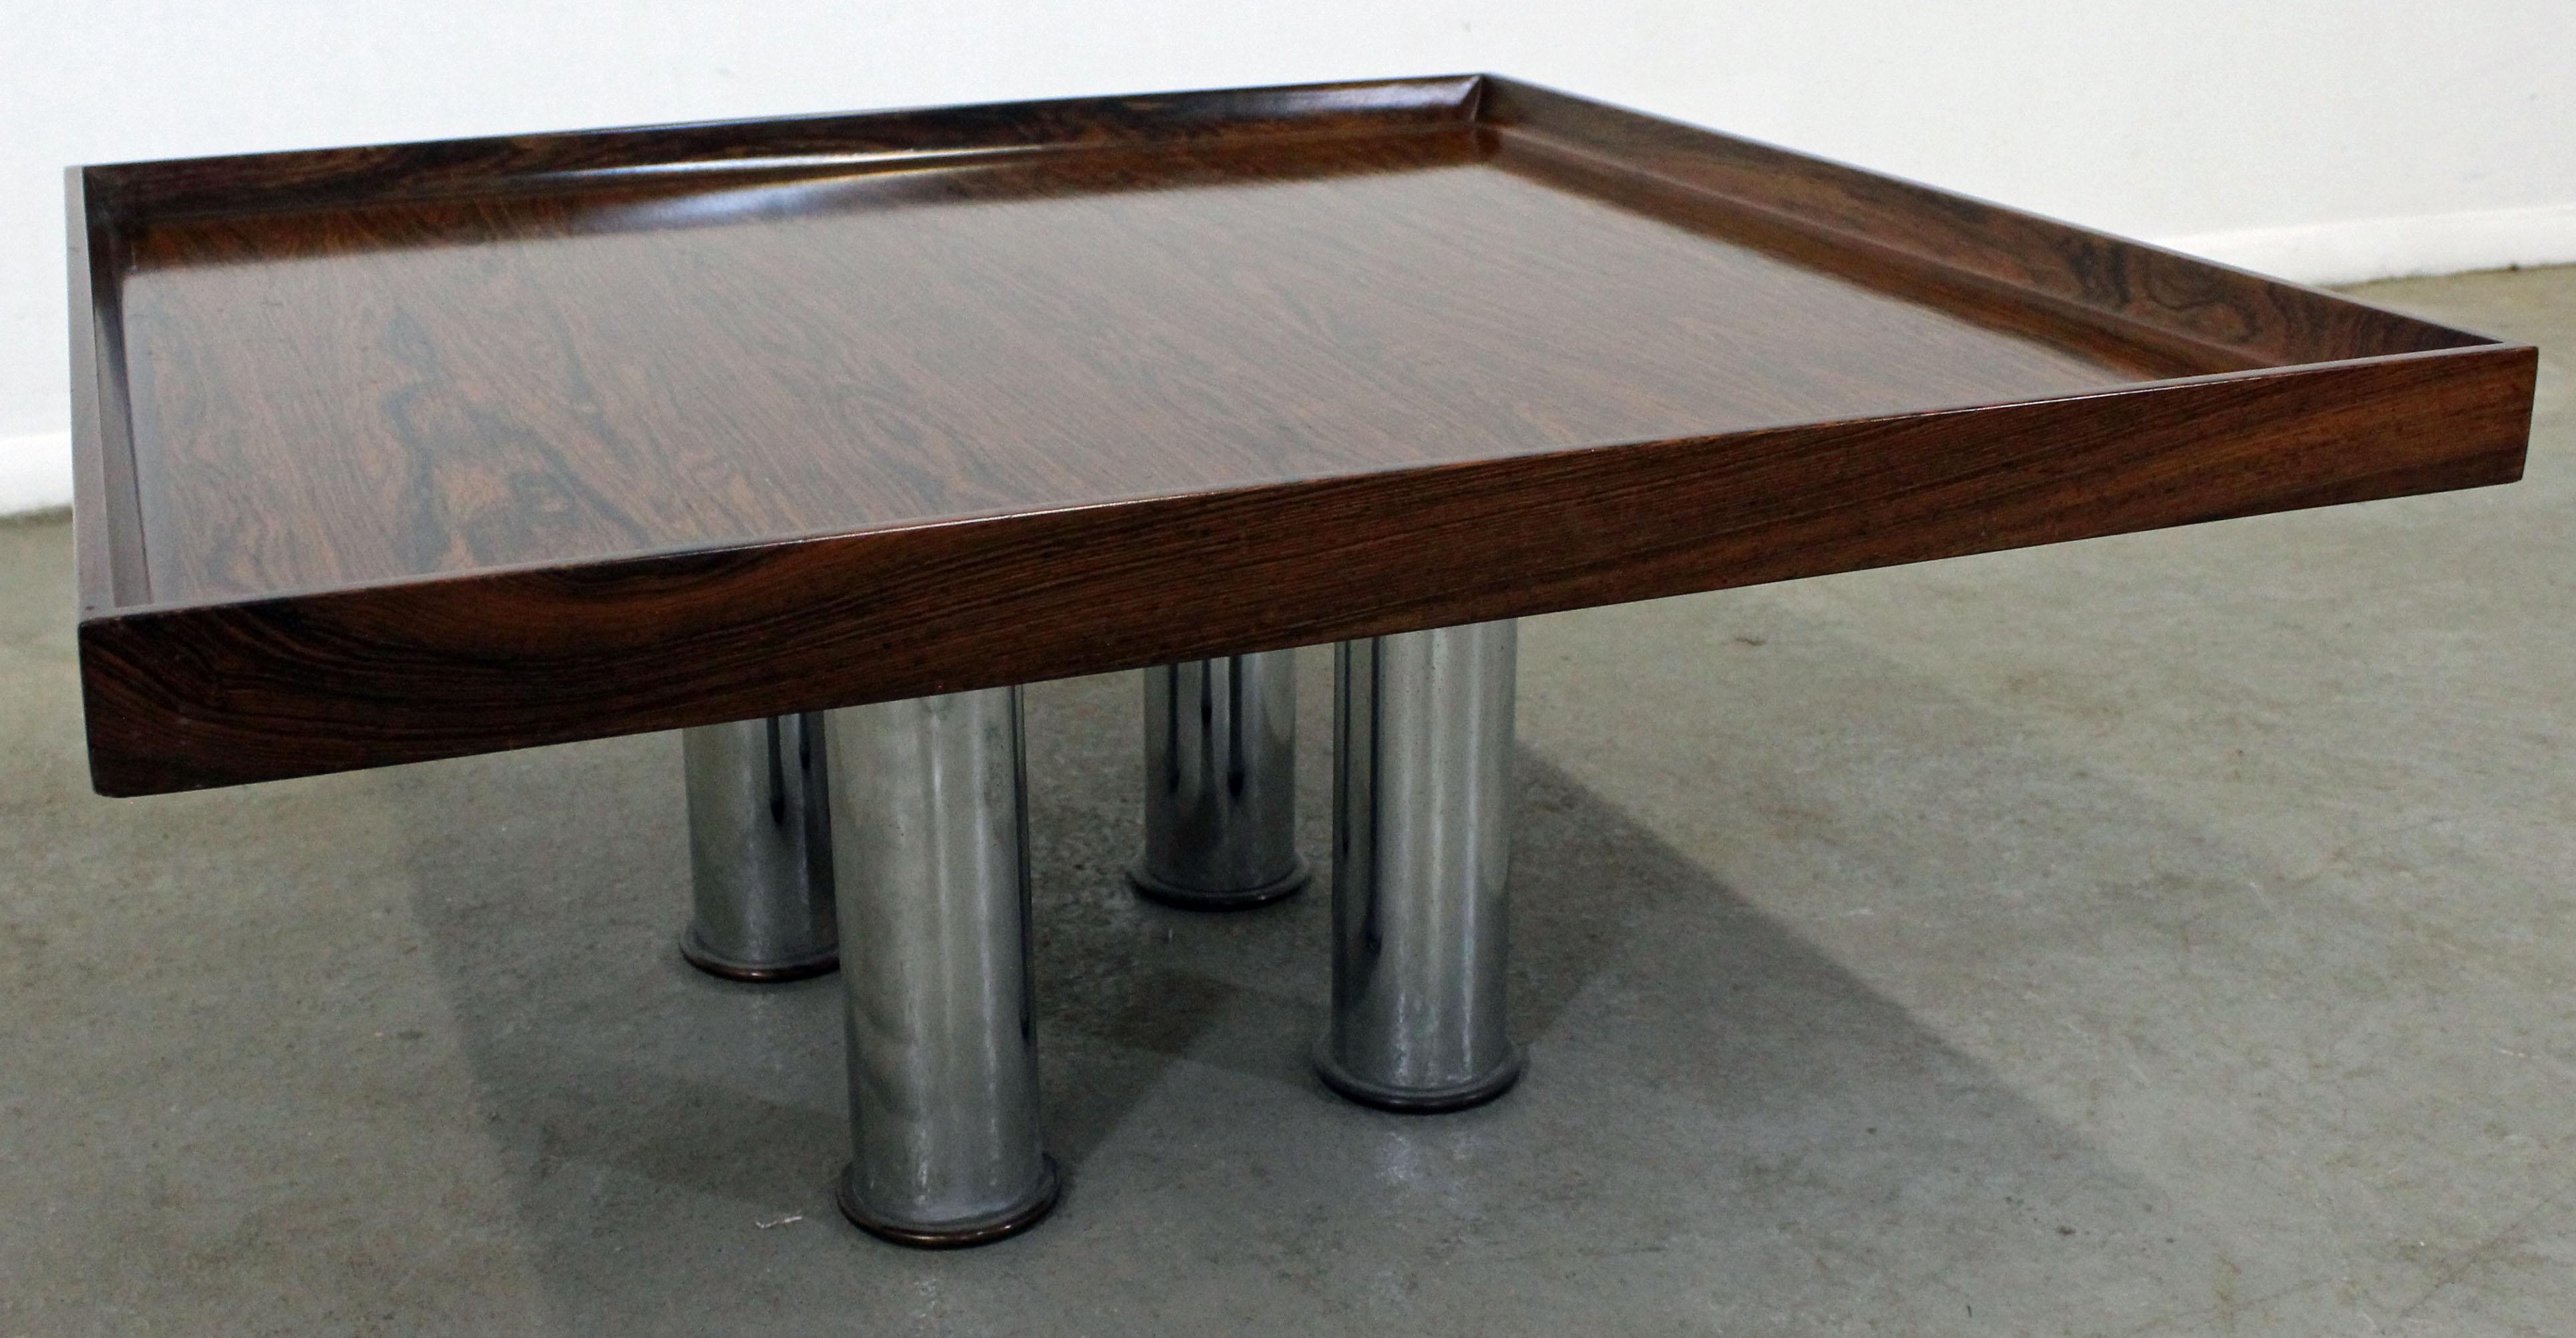 American Mid-Century Modern Knoll Rosewood Chrome Coffee or End Table